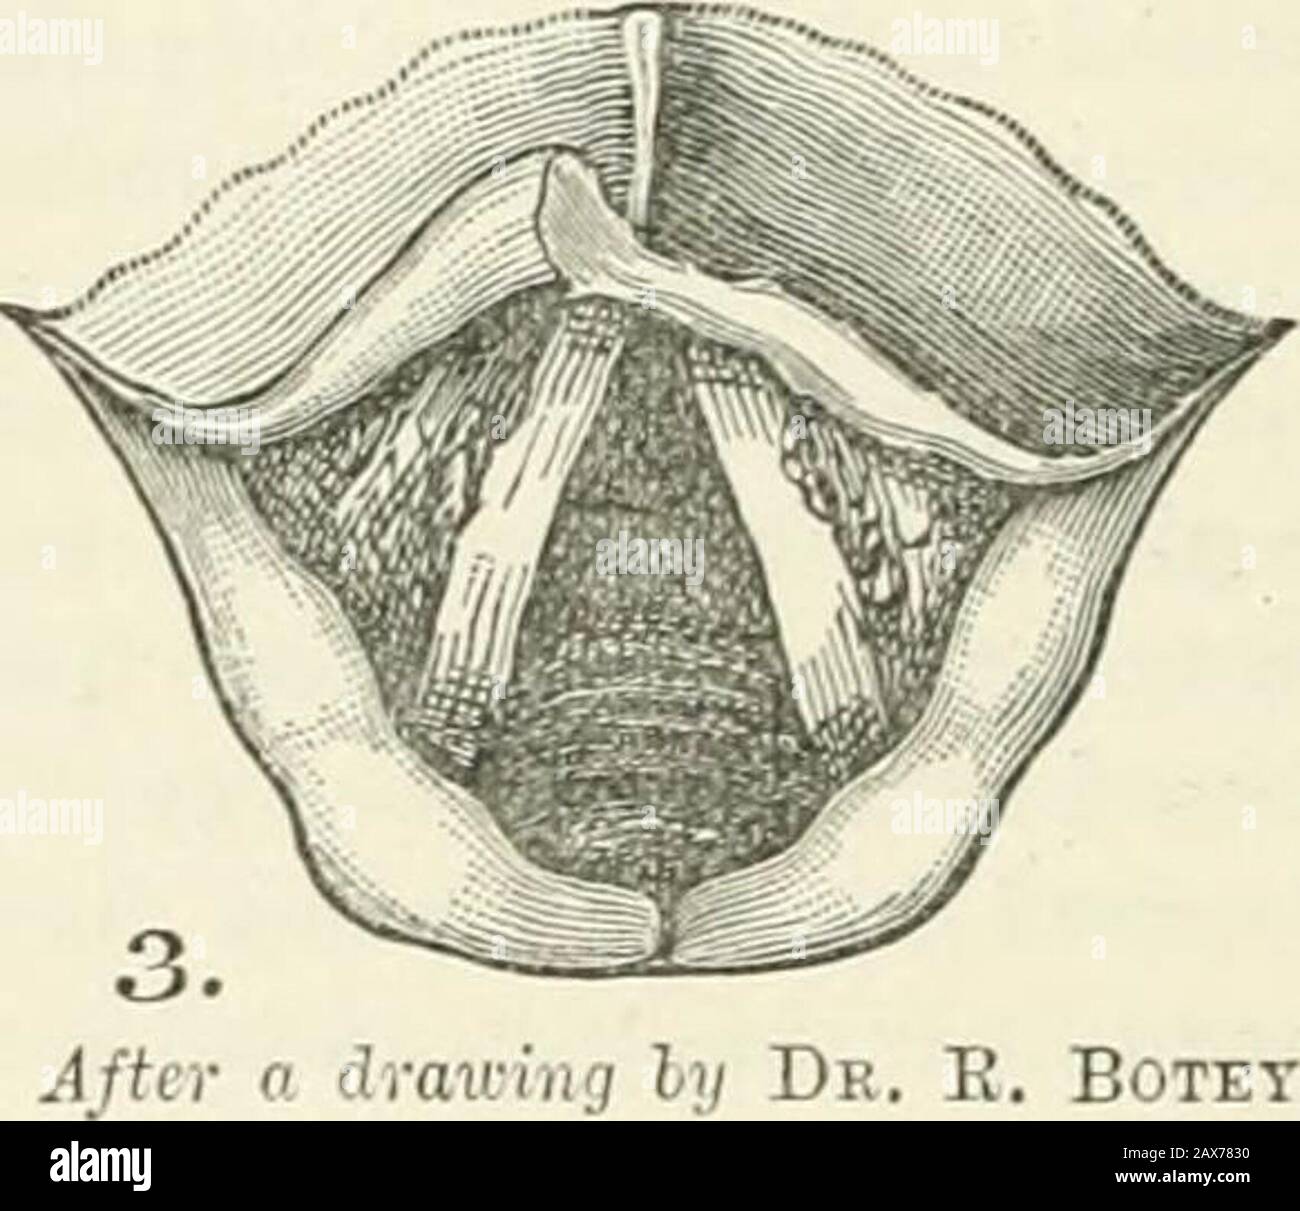 The Journal of laryngology and otology . AjUx a di-oKiiig ijy De. R. Botey.. 7 I)/ Ur. easily, with very little traction. In spite of this I believed that in the endI should have to eliminate the laryngeal condylomata, for I did not thinkthey would disappear by this treatment alone, and I feared that ultimately,perhaps, the cicatricial retraction would lead to fibrous stenosis of theglottis, and I imagined would require Schroetters tubes later on. Butnothing of this kind occurred. Little by little the laryngeal vegetationsdisappeared, the epiglottic ulceration cicatrized completely. Respiratio Stock Photo